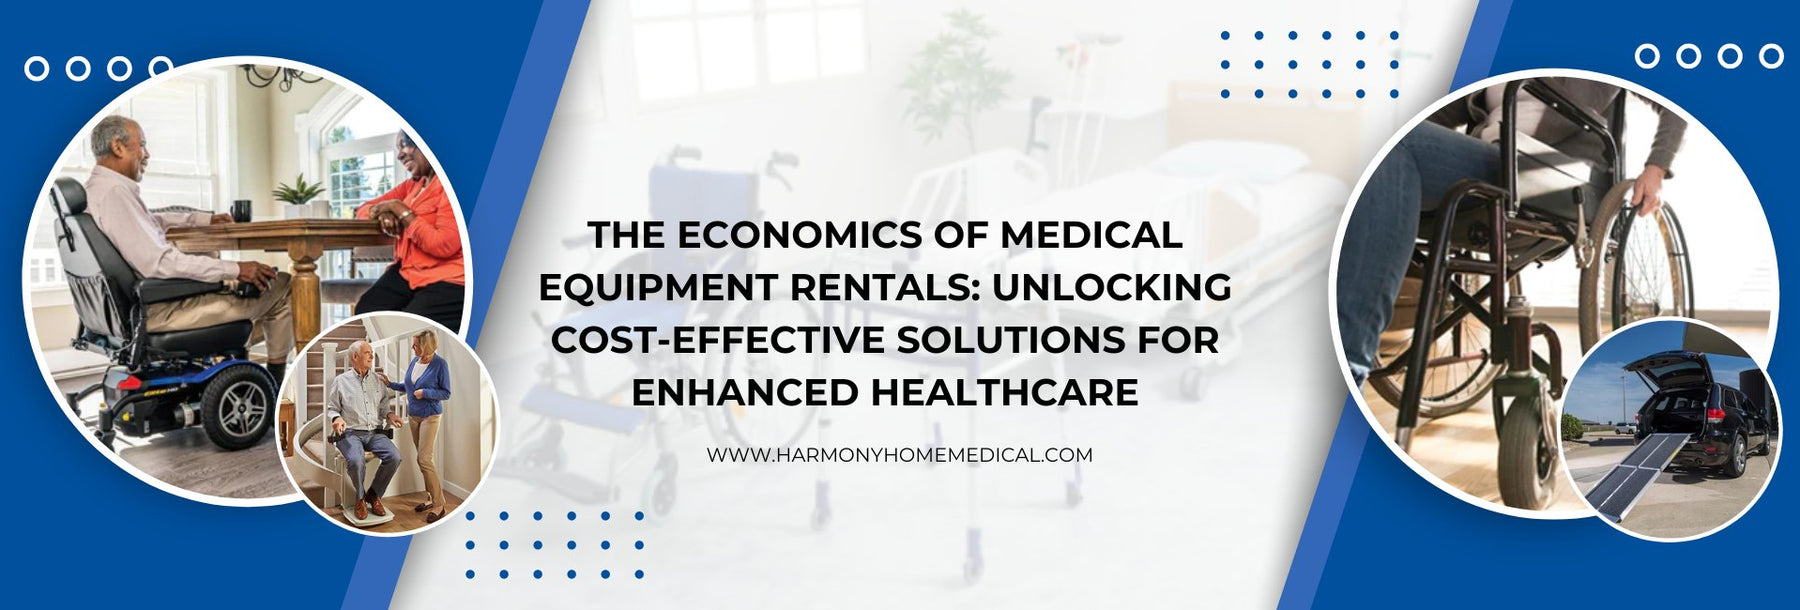 The Economics of Medical Equipment Rentals: Unlocking Cost-Effective Solutions for Enhanced Healthcare - Harmony Home Medical Supply